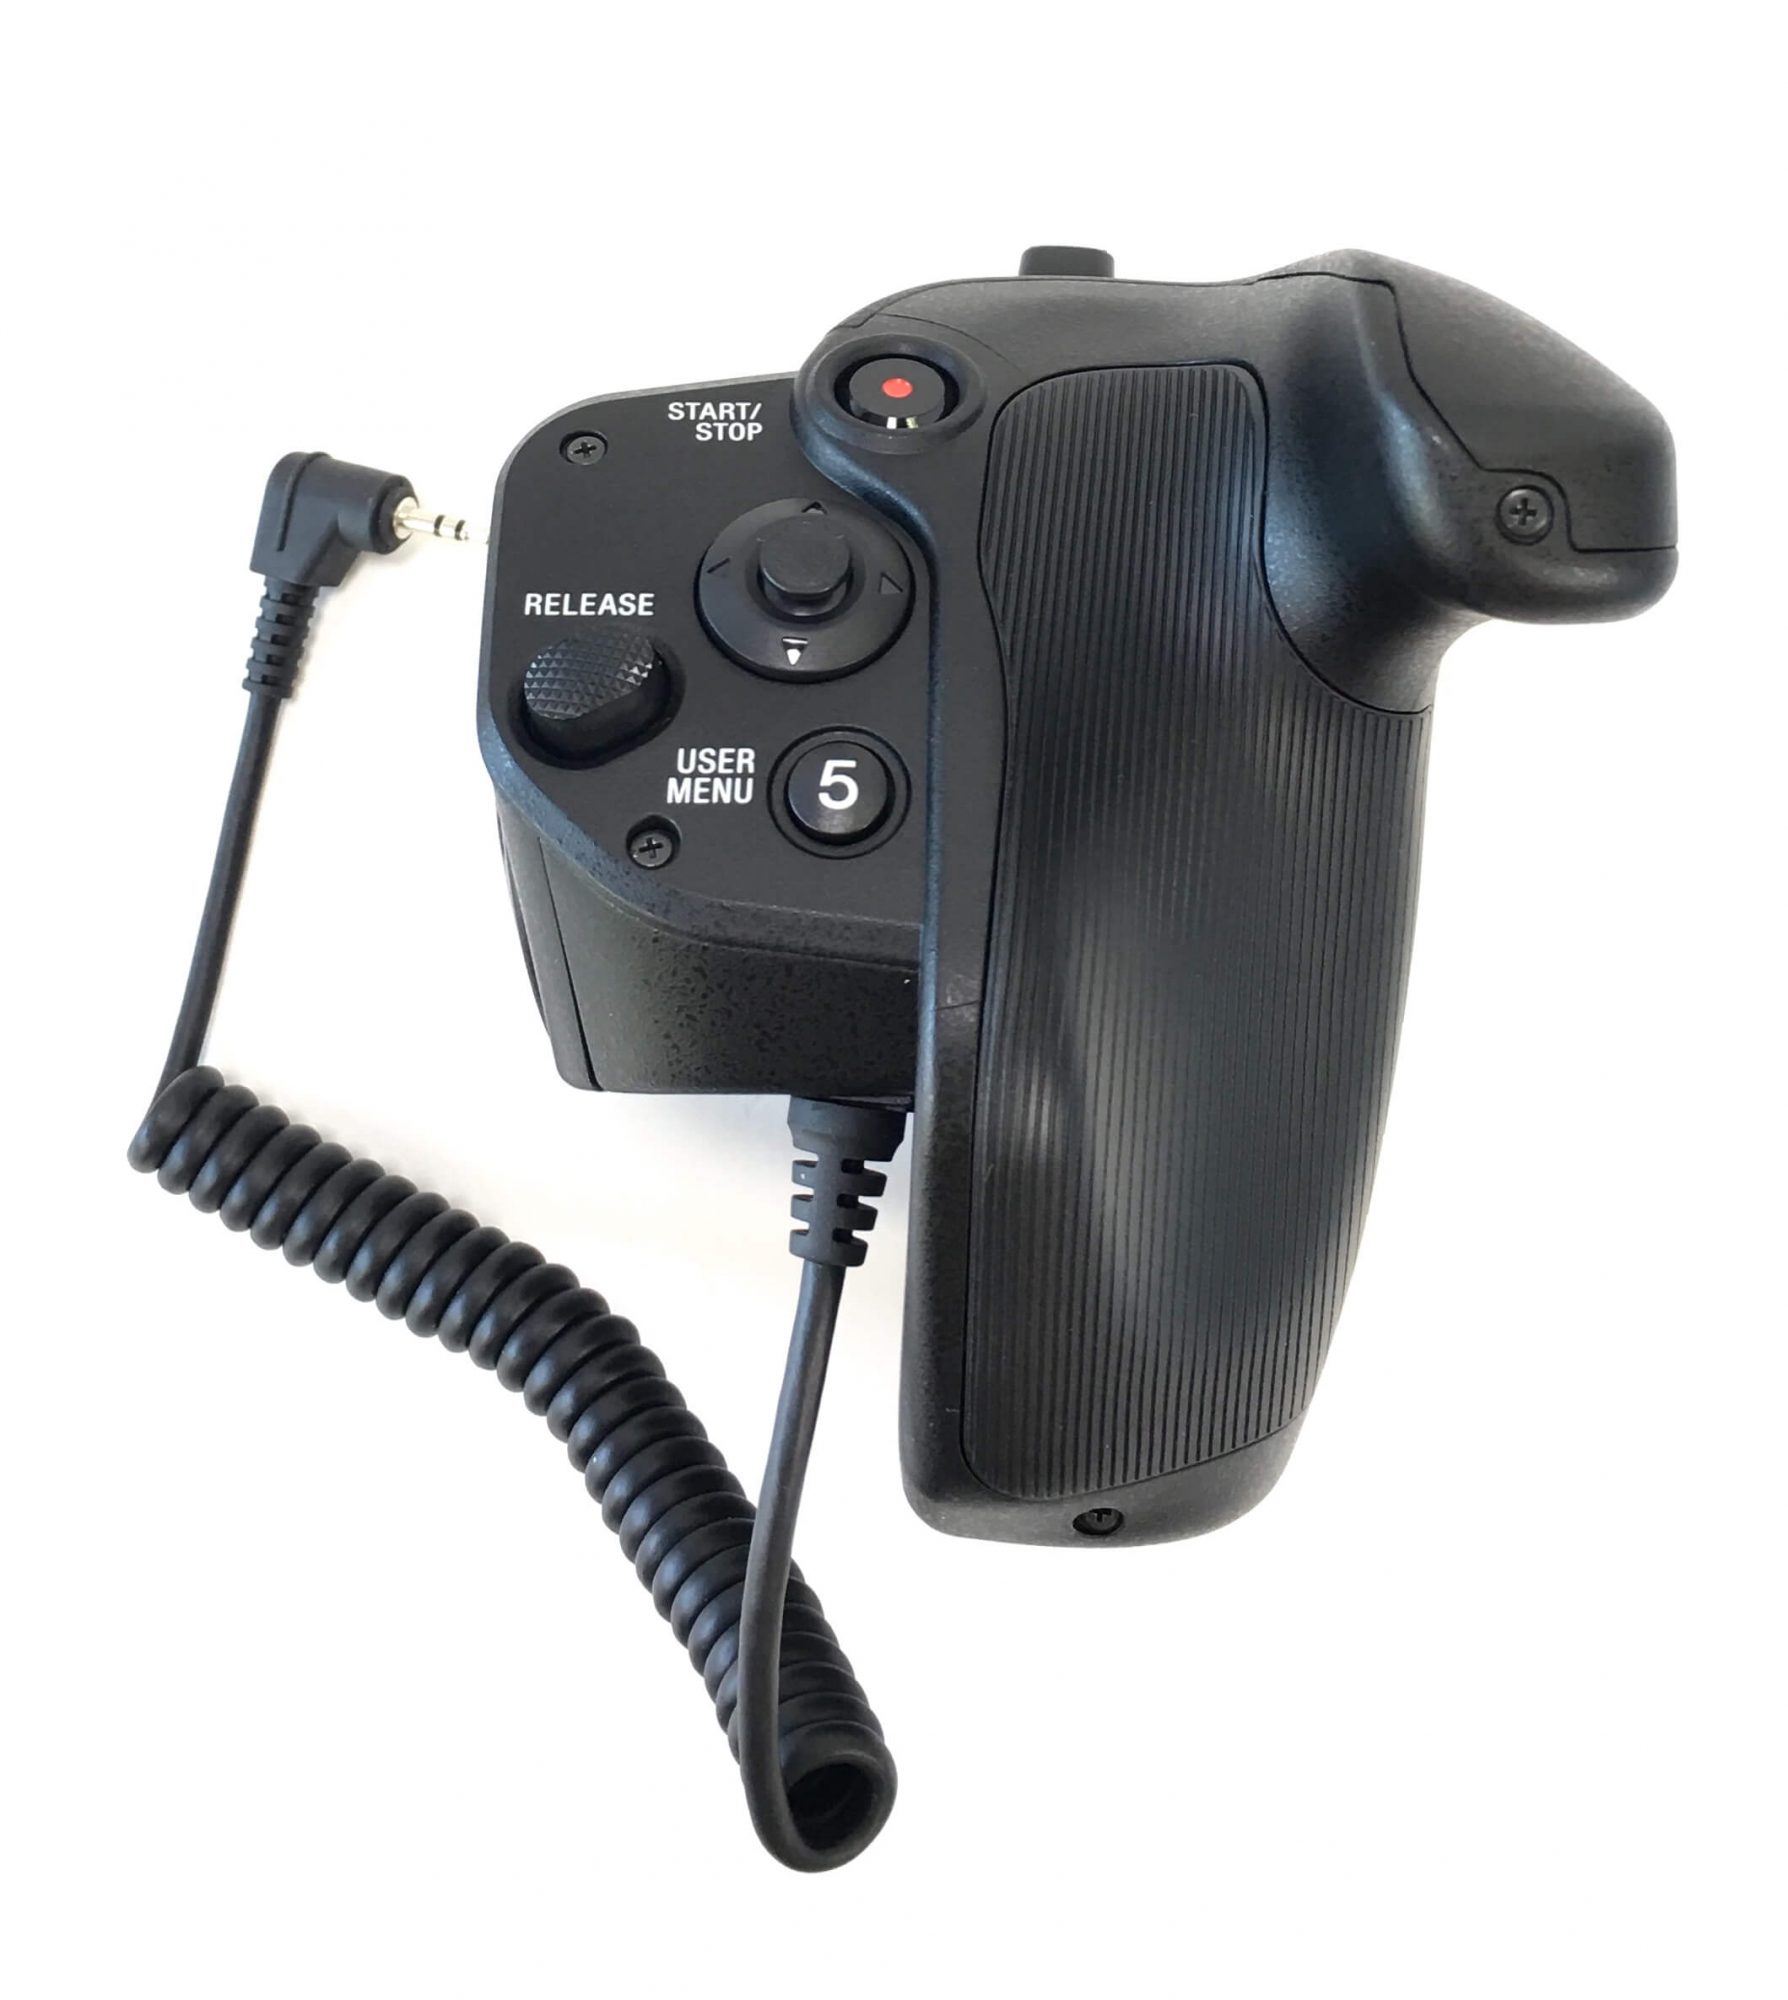 Original side hand grip with zoom control that fits on the Sony PXW-FS7 camcorder. It is a genuine Sony part, sourced directly from Sony USA. Brand new factory fresh. Free Shipping.